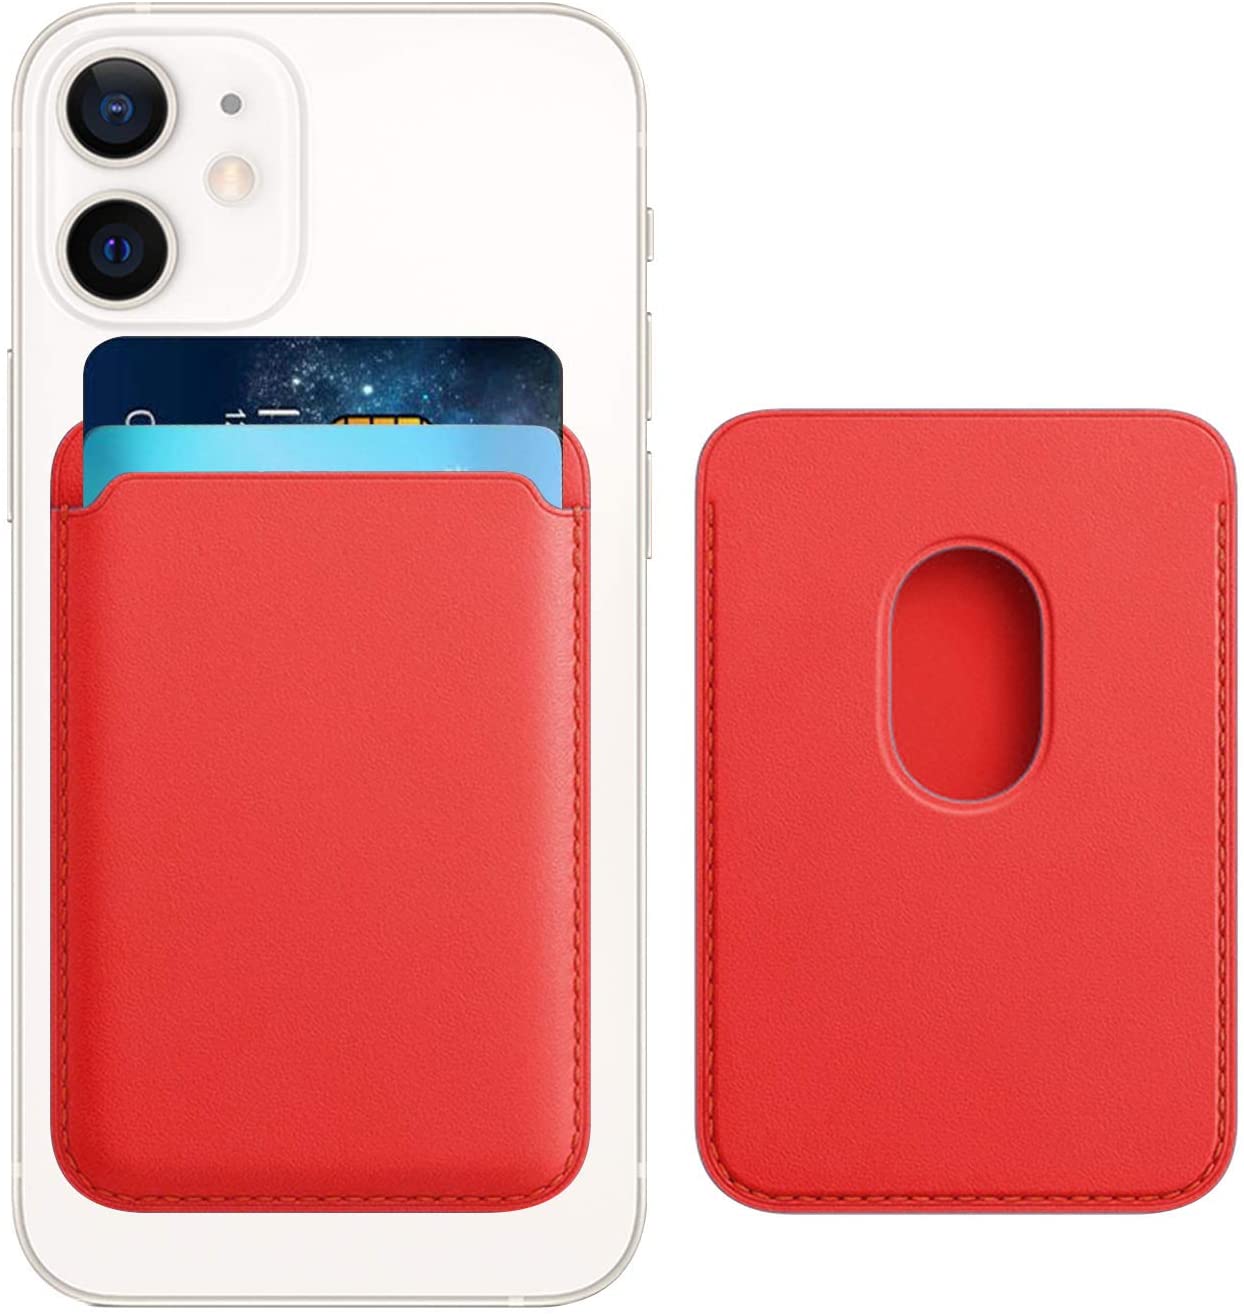 PU Leather Magnetic Card WALLET Pouch Holder for iPhone 12 / 12 Pro / 12 Mini /12 Pro Max (Red)